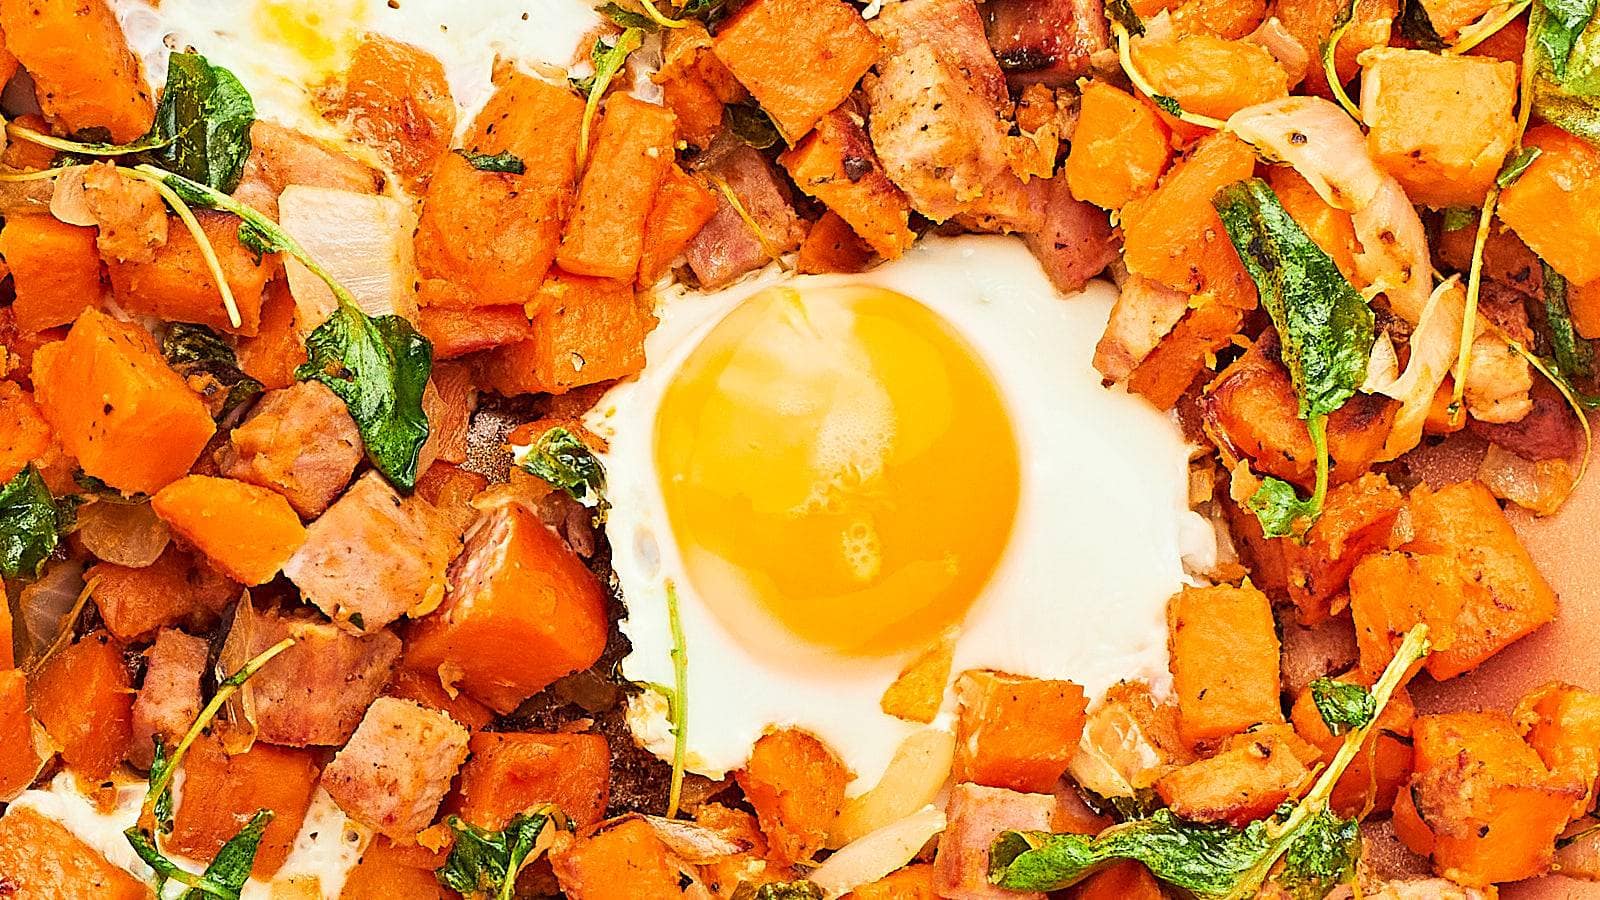 Sweet Potato Hash recipe by Cheerful Cook.